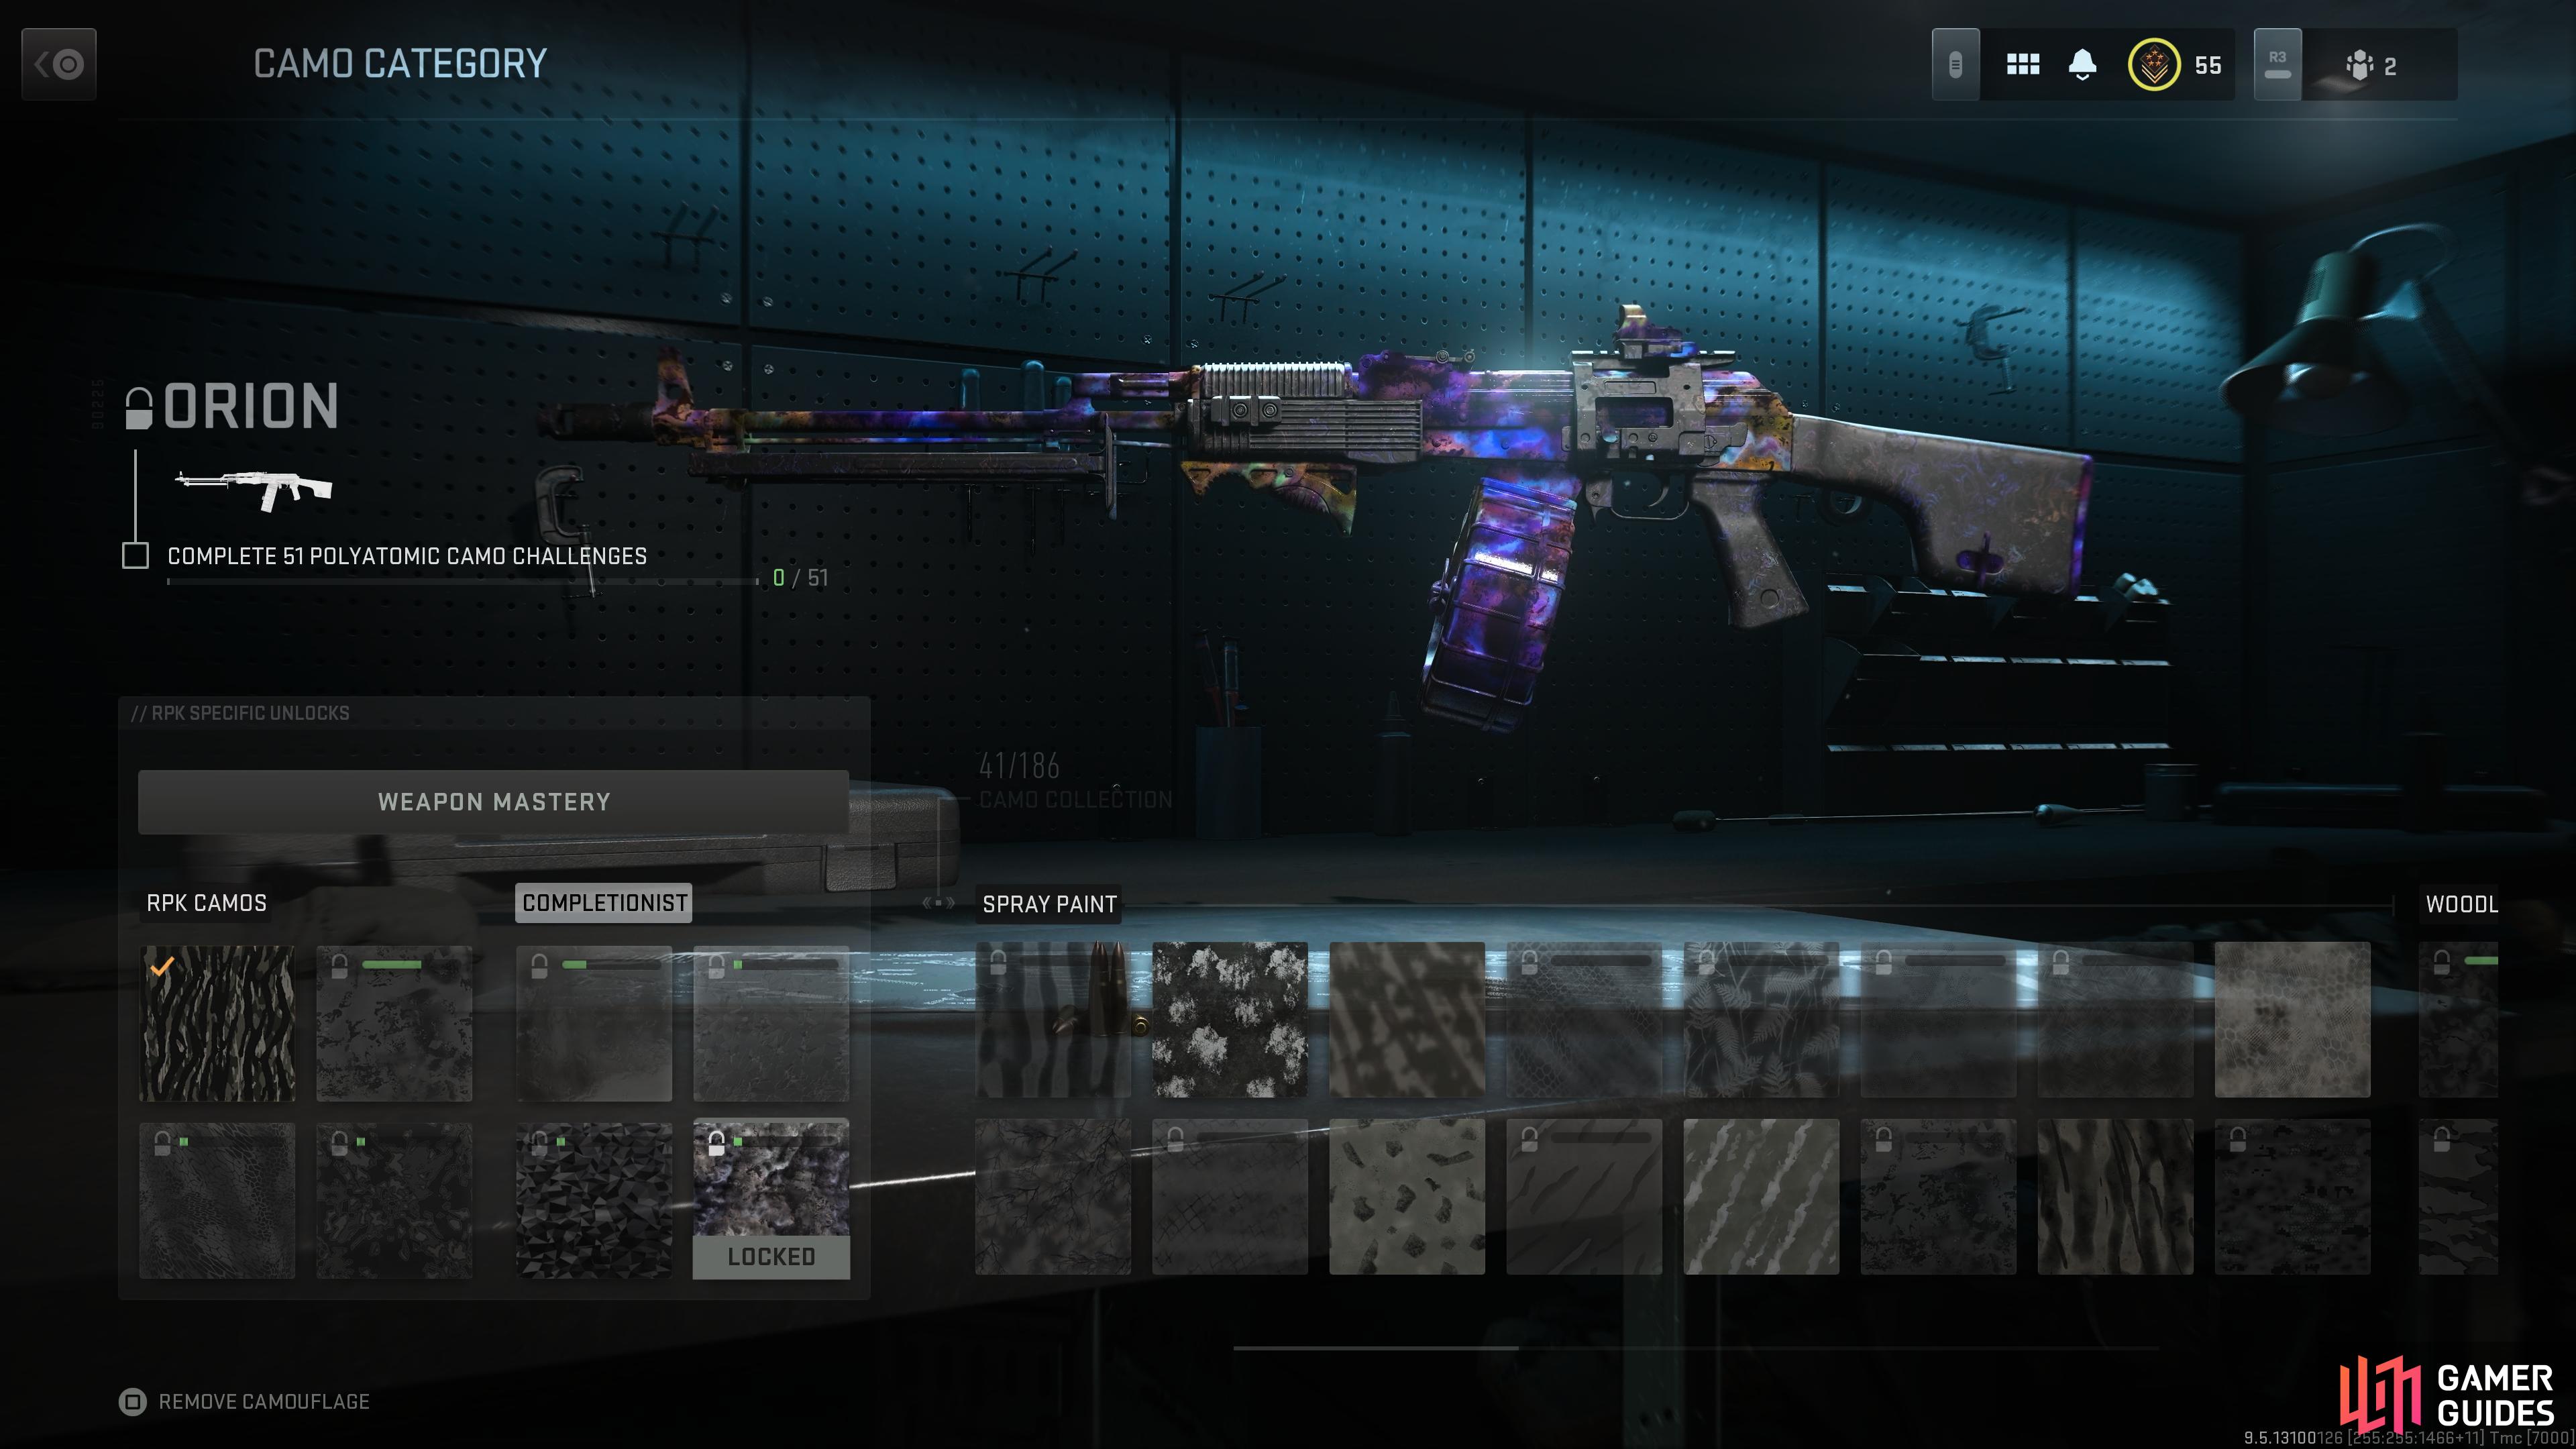 Here is a look at the RPK camo challenges in MW2, and tips on completing them all.